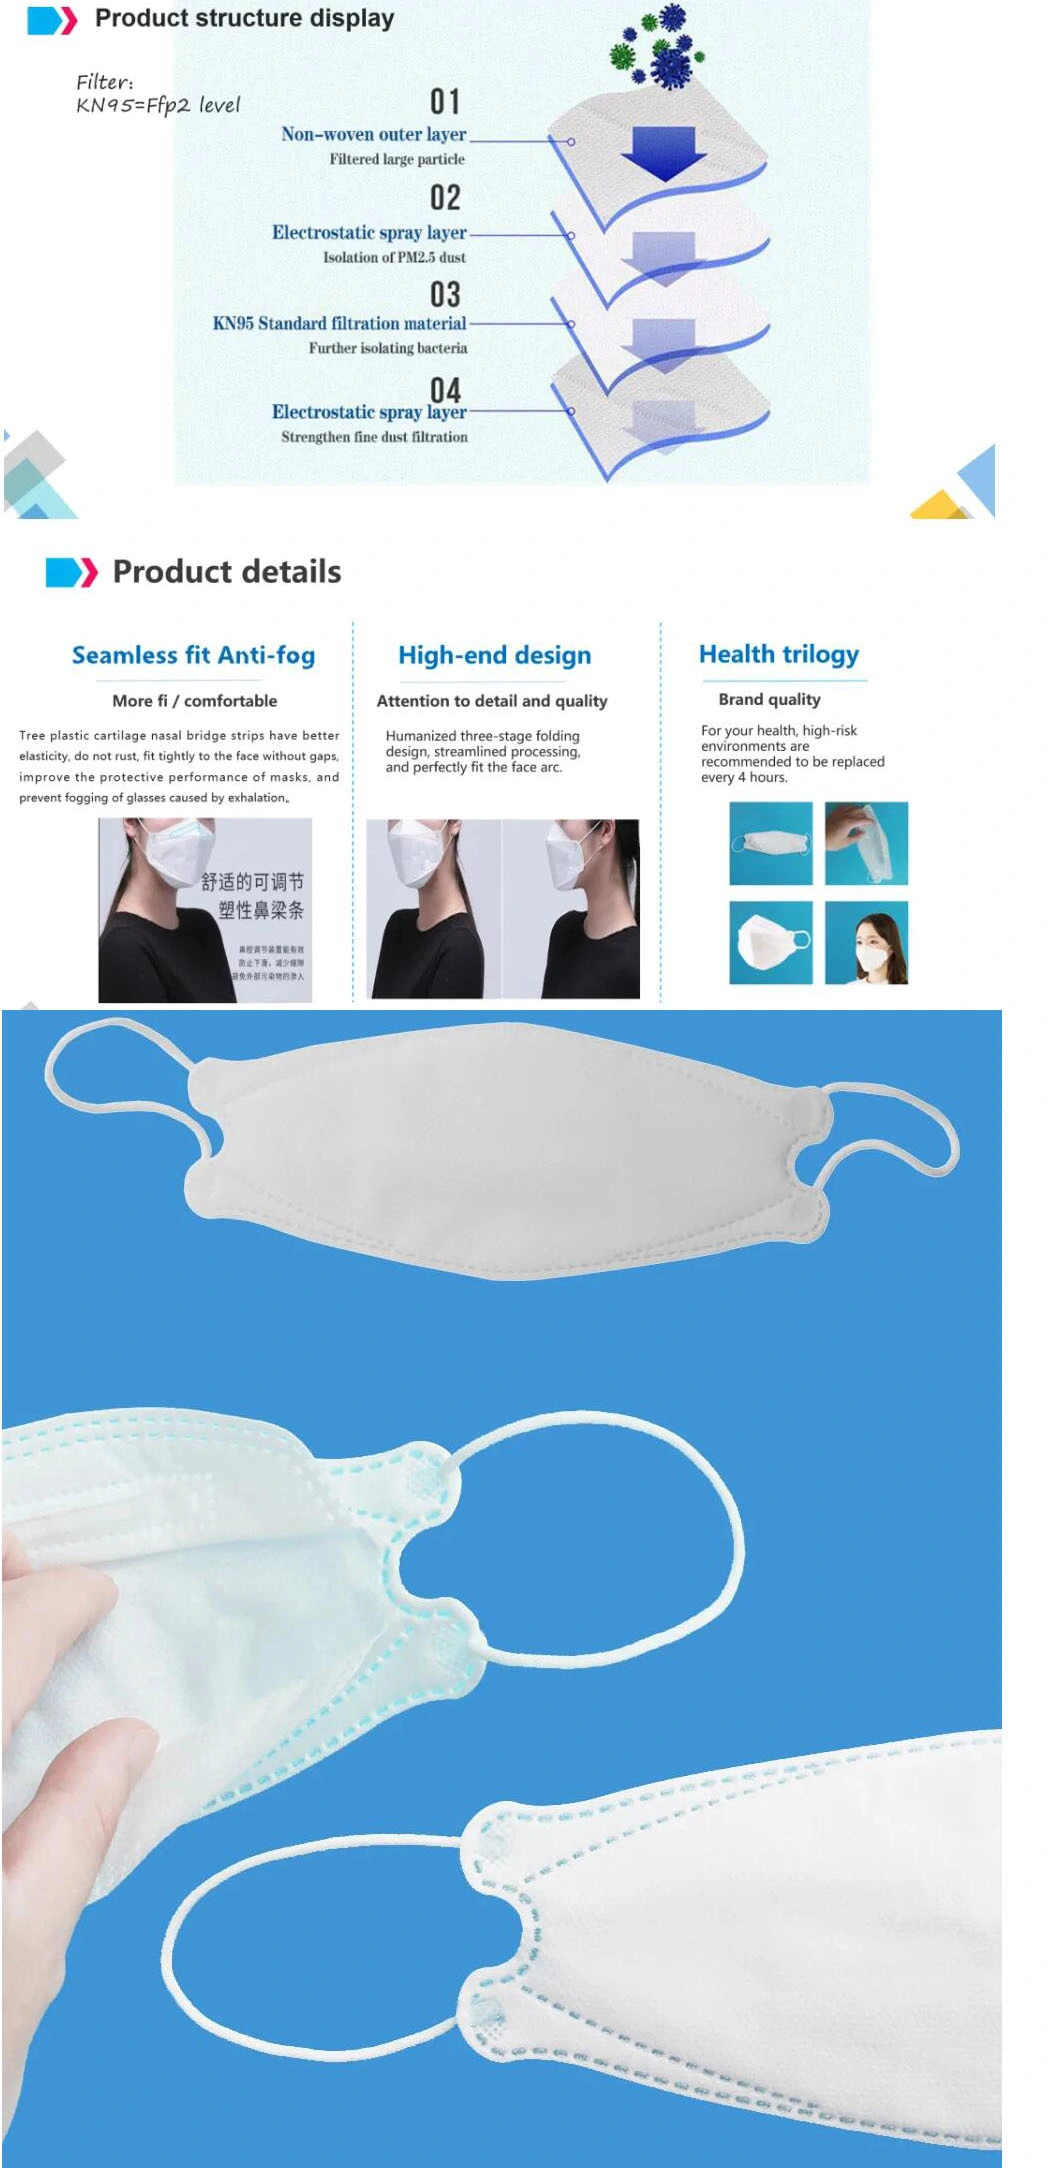 Fish Mouth N95 / FFP2 Respirator Dust Prevention Respirator Filter Mask CE Certification